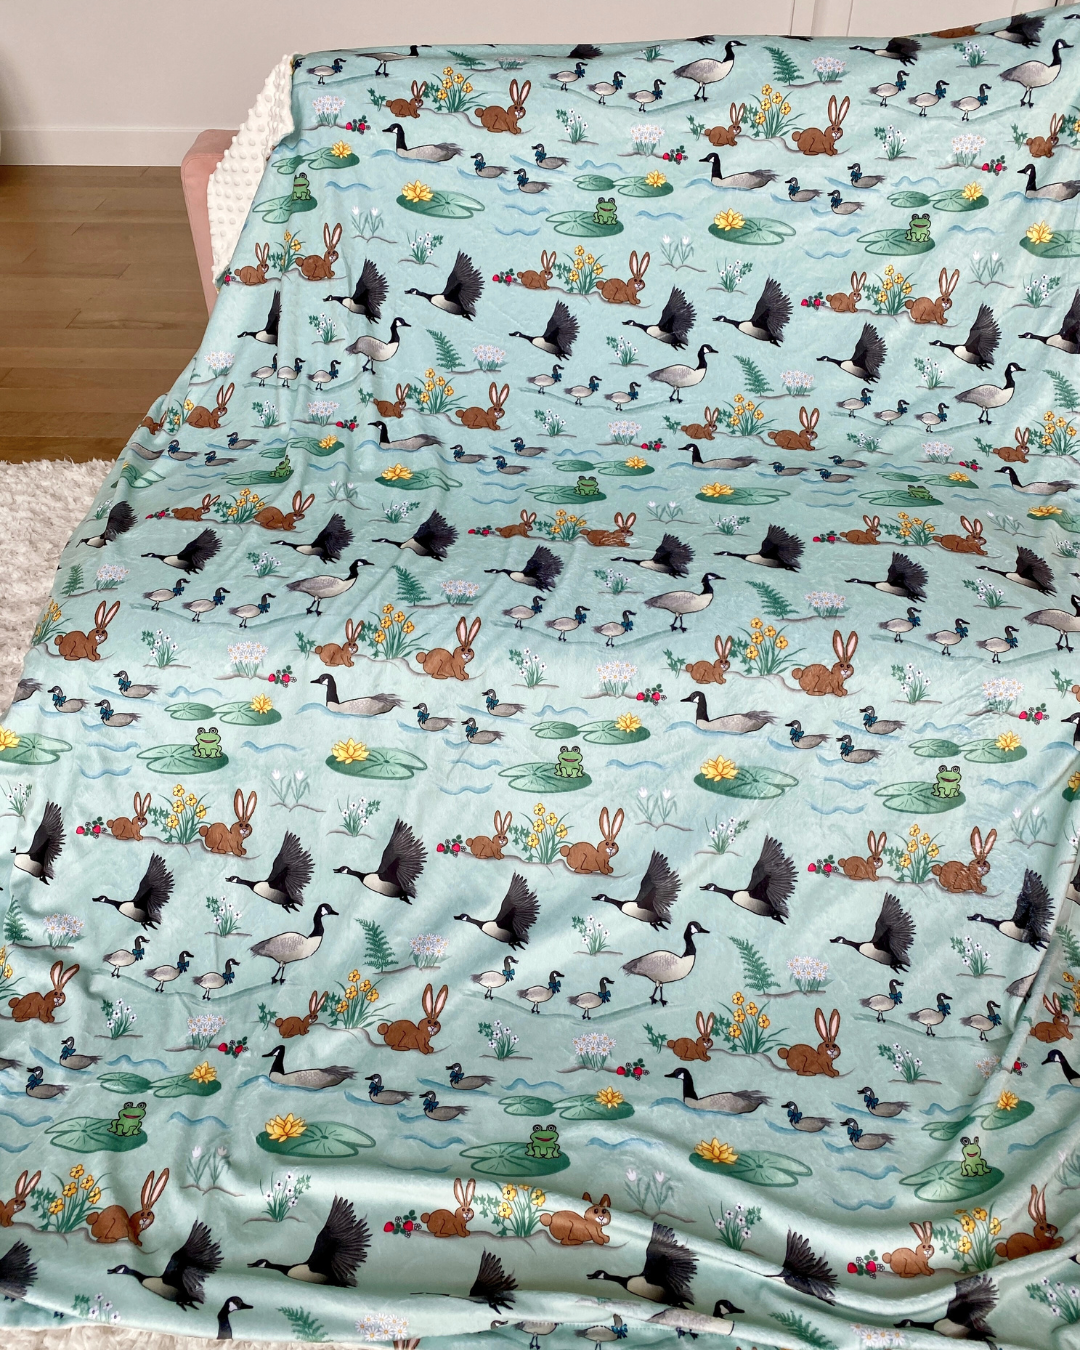 Giant Blanket: Canada Geese and Rabbits